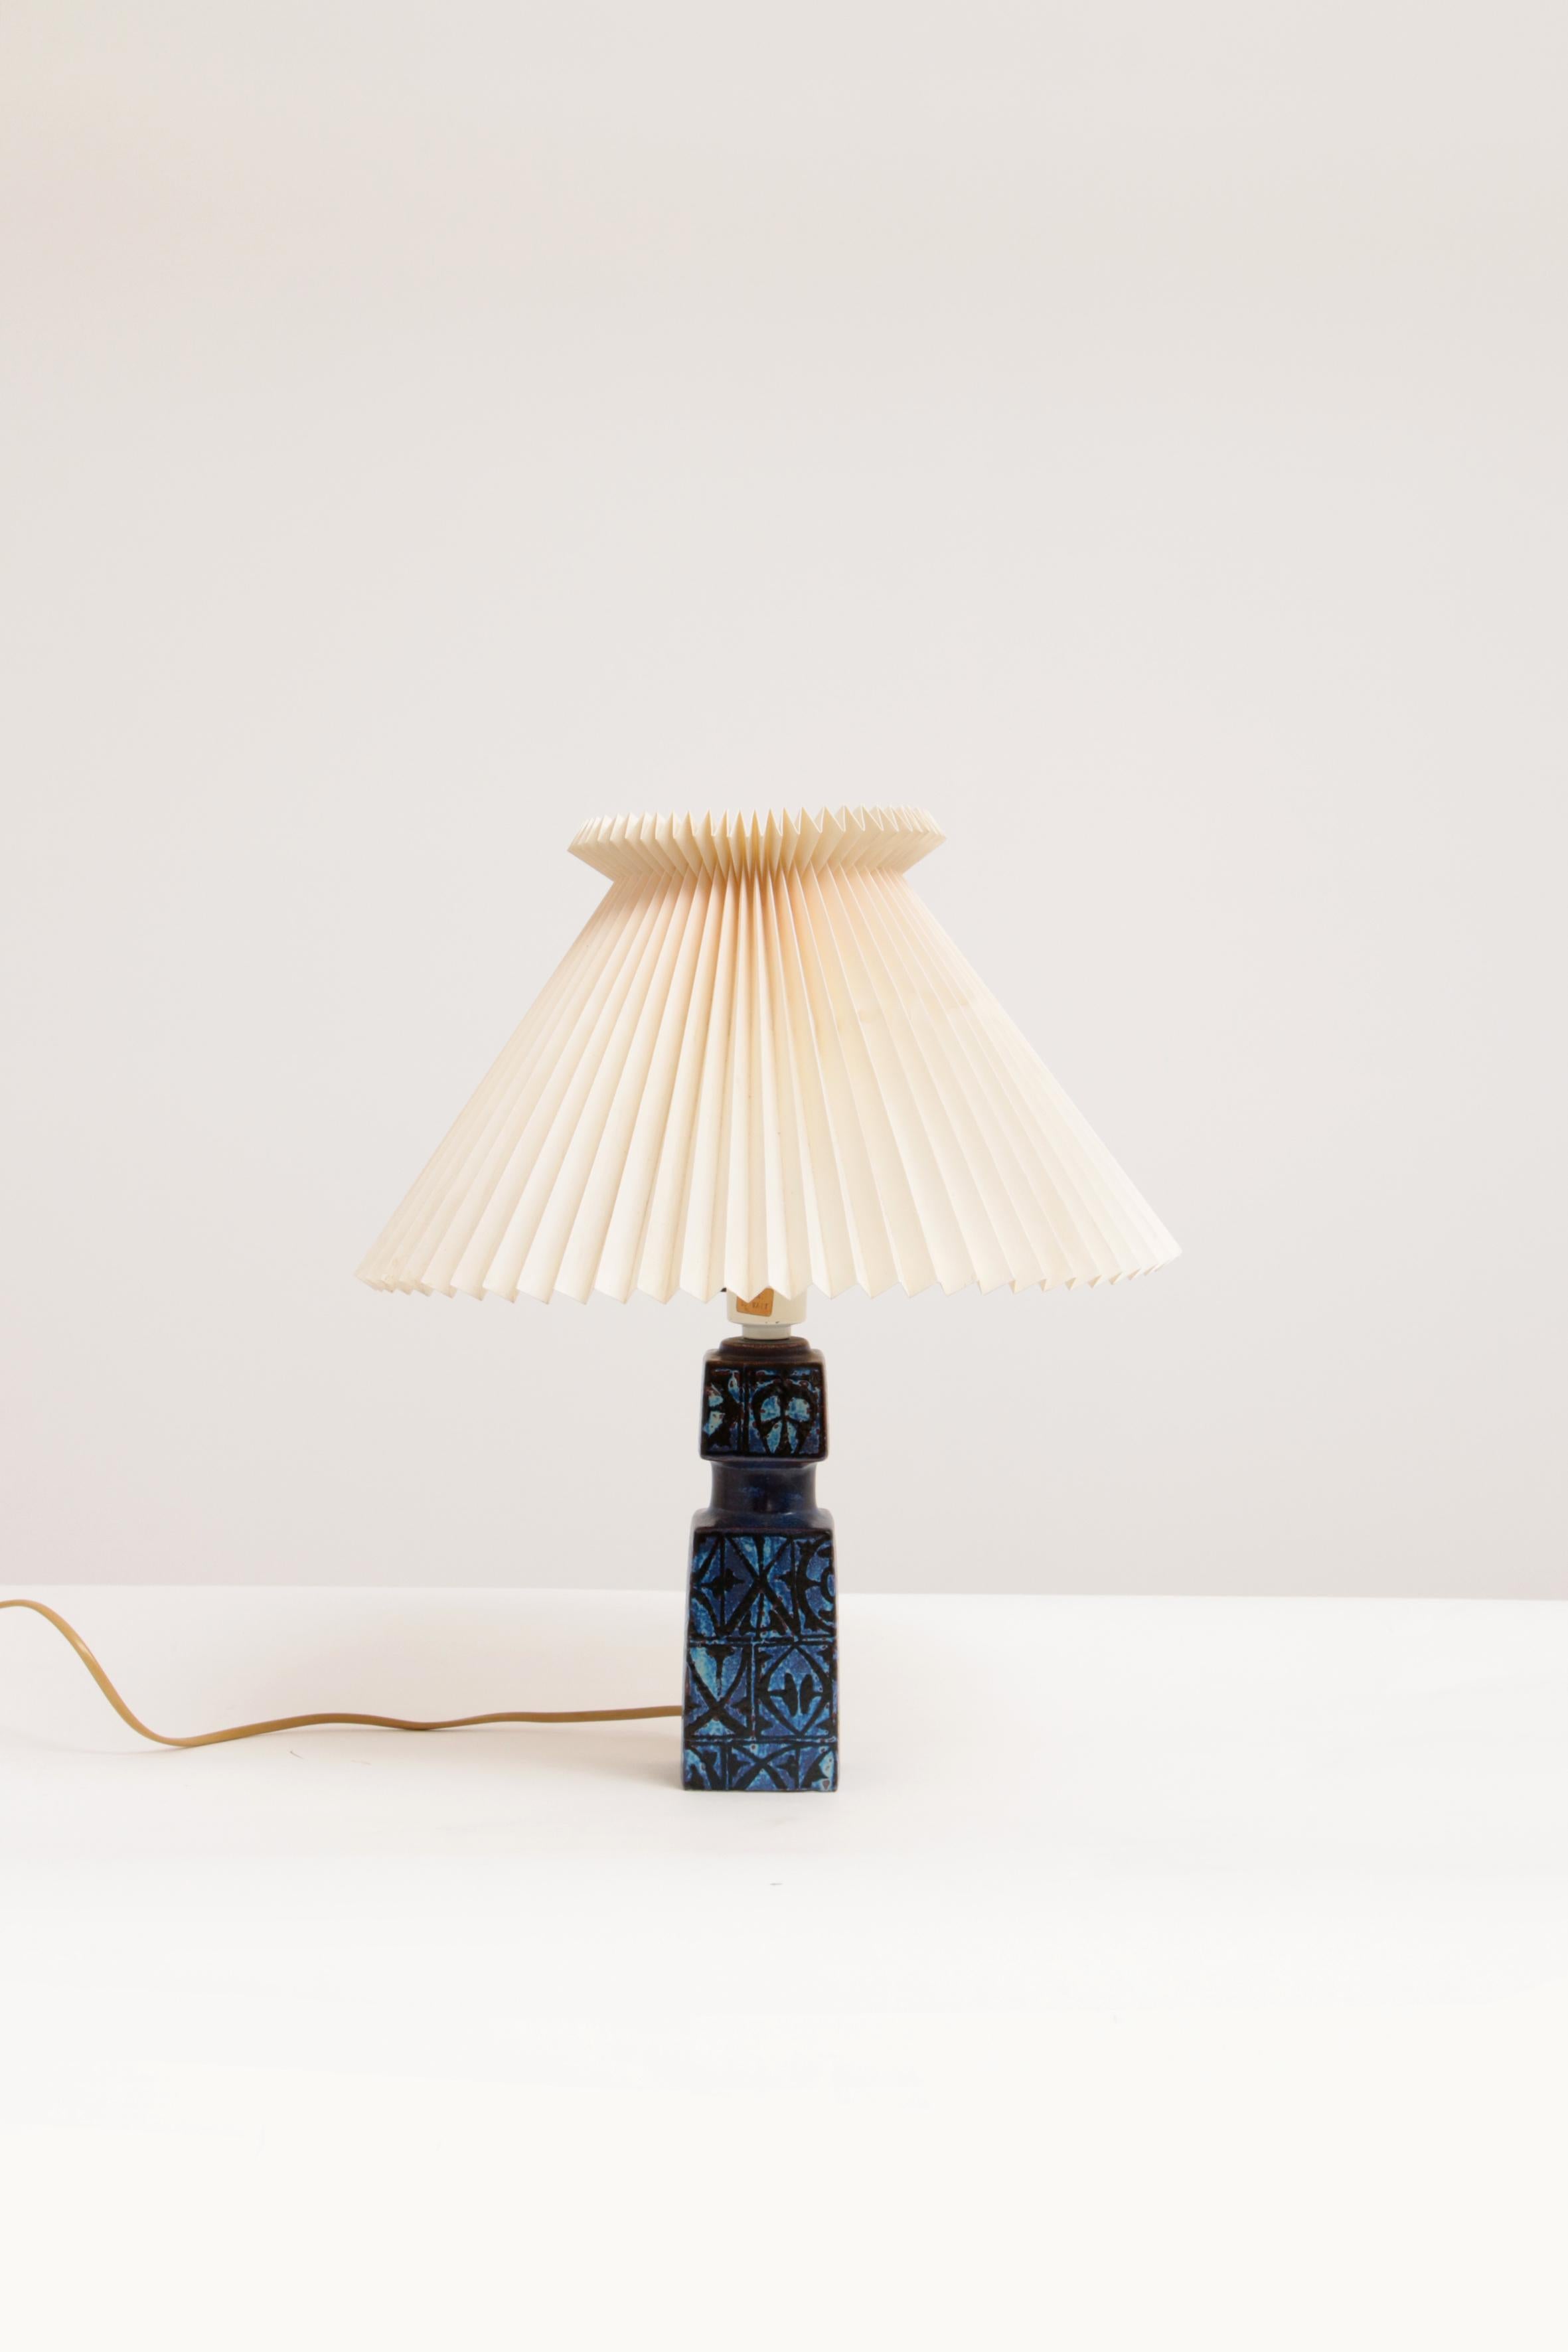 Ceramic table lamp designed by Nils Thorsson for Royal Copenhagen and Fog & Mørup, circa 1970. Model Baca.

It has a tactile abstract decor with black on an almost purple tinted blue. The stated height is with lamp and without shade. The hood is